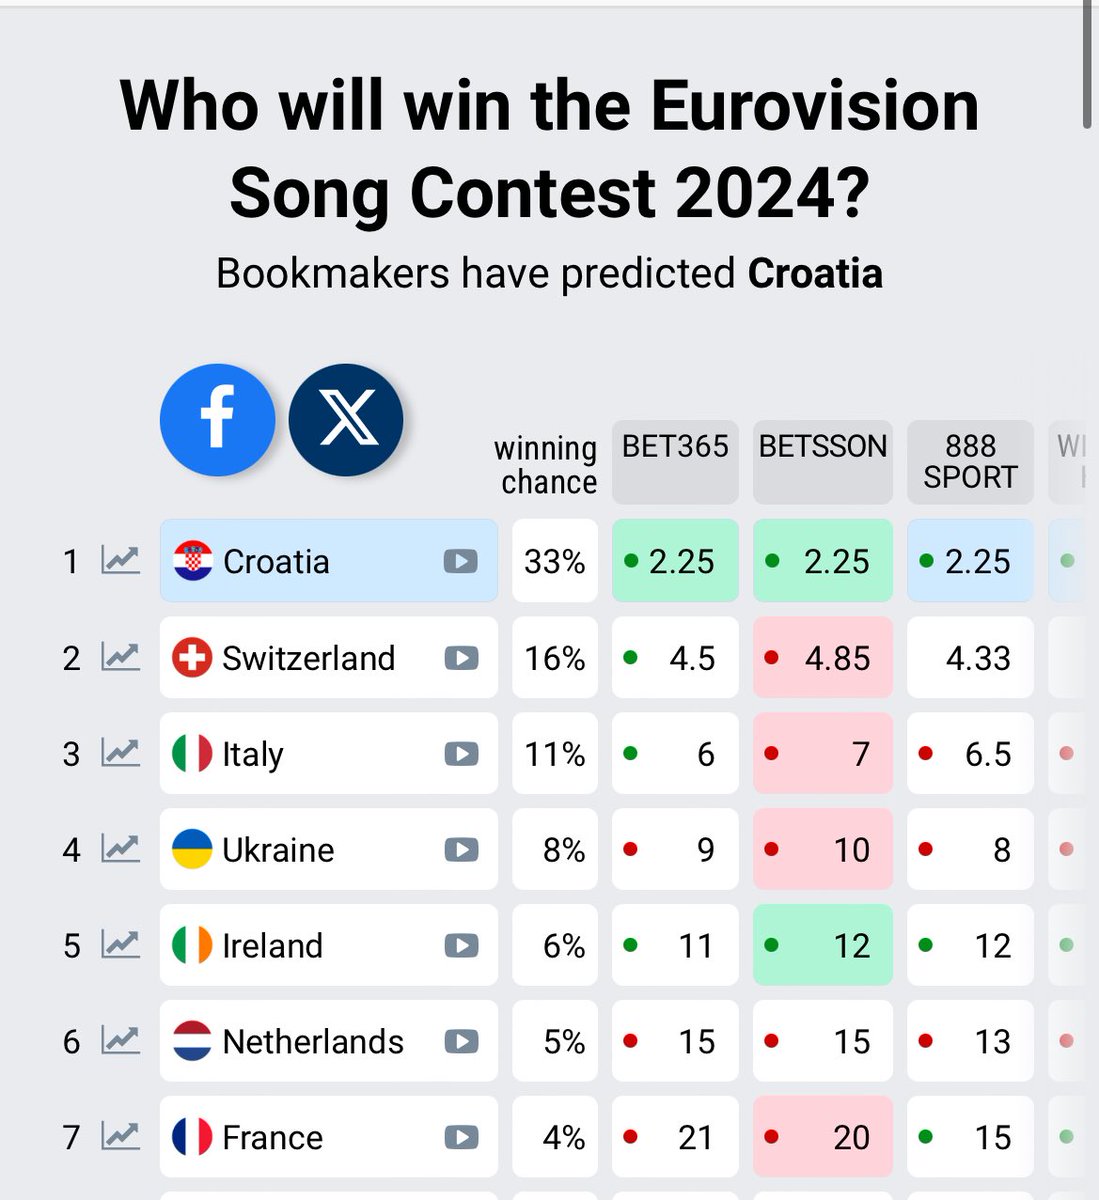 WHAT IS HAPPENING??????

IT’S 33% NOW FOR CROATIA WINNING EUROVISION 2024

😭😭😭😭😭😭😭😭🇭🇷🇭🇷🇭🇷